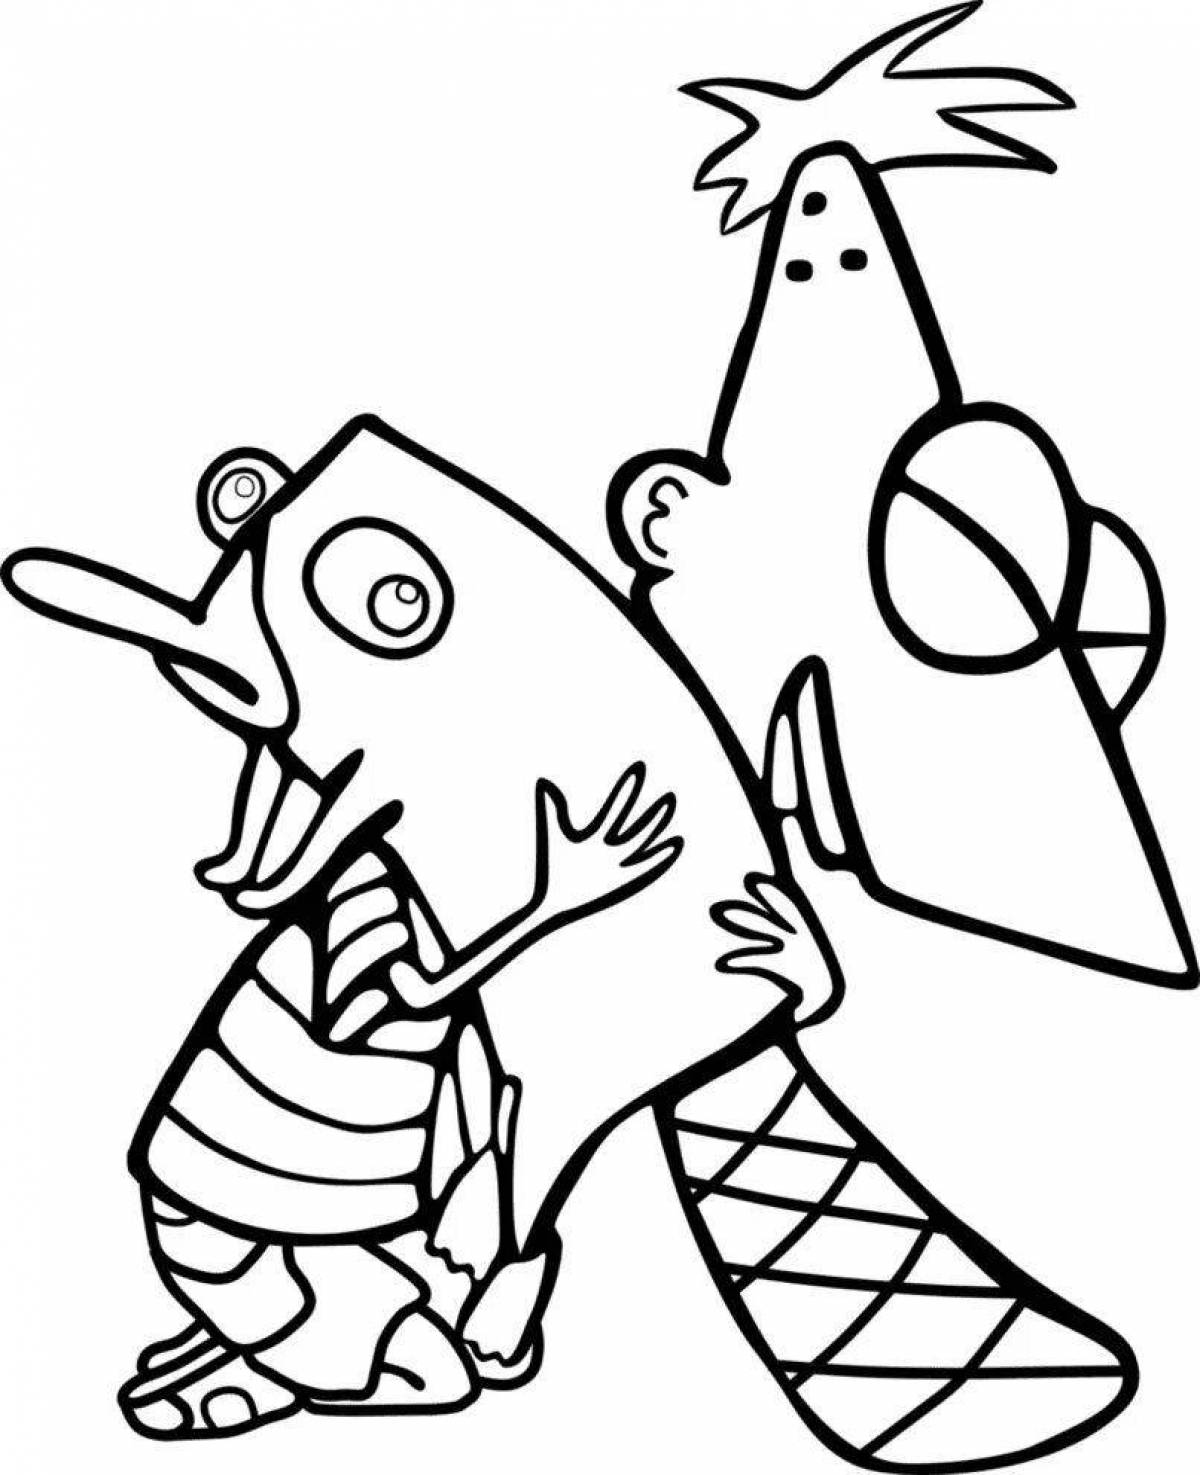 Sweet perry platypus coloring page